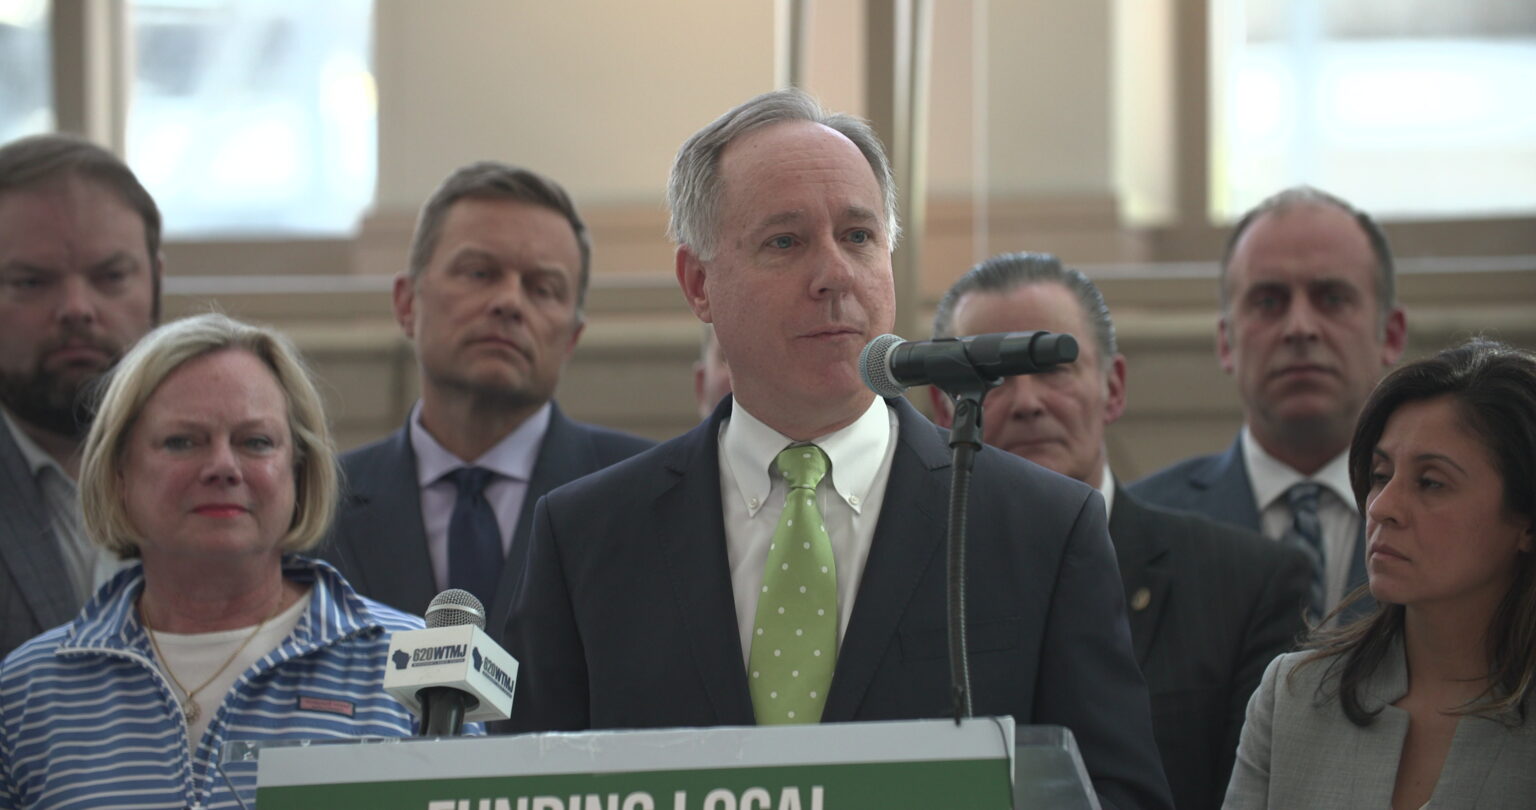 Robin Vos stands at a podium and speaks into a microphone, with other people standing beside and behind him.